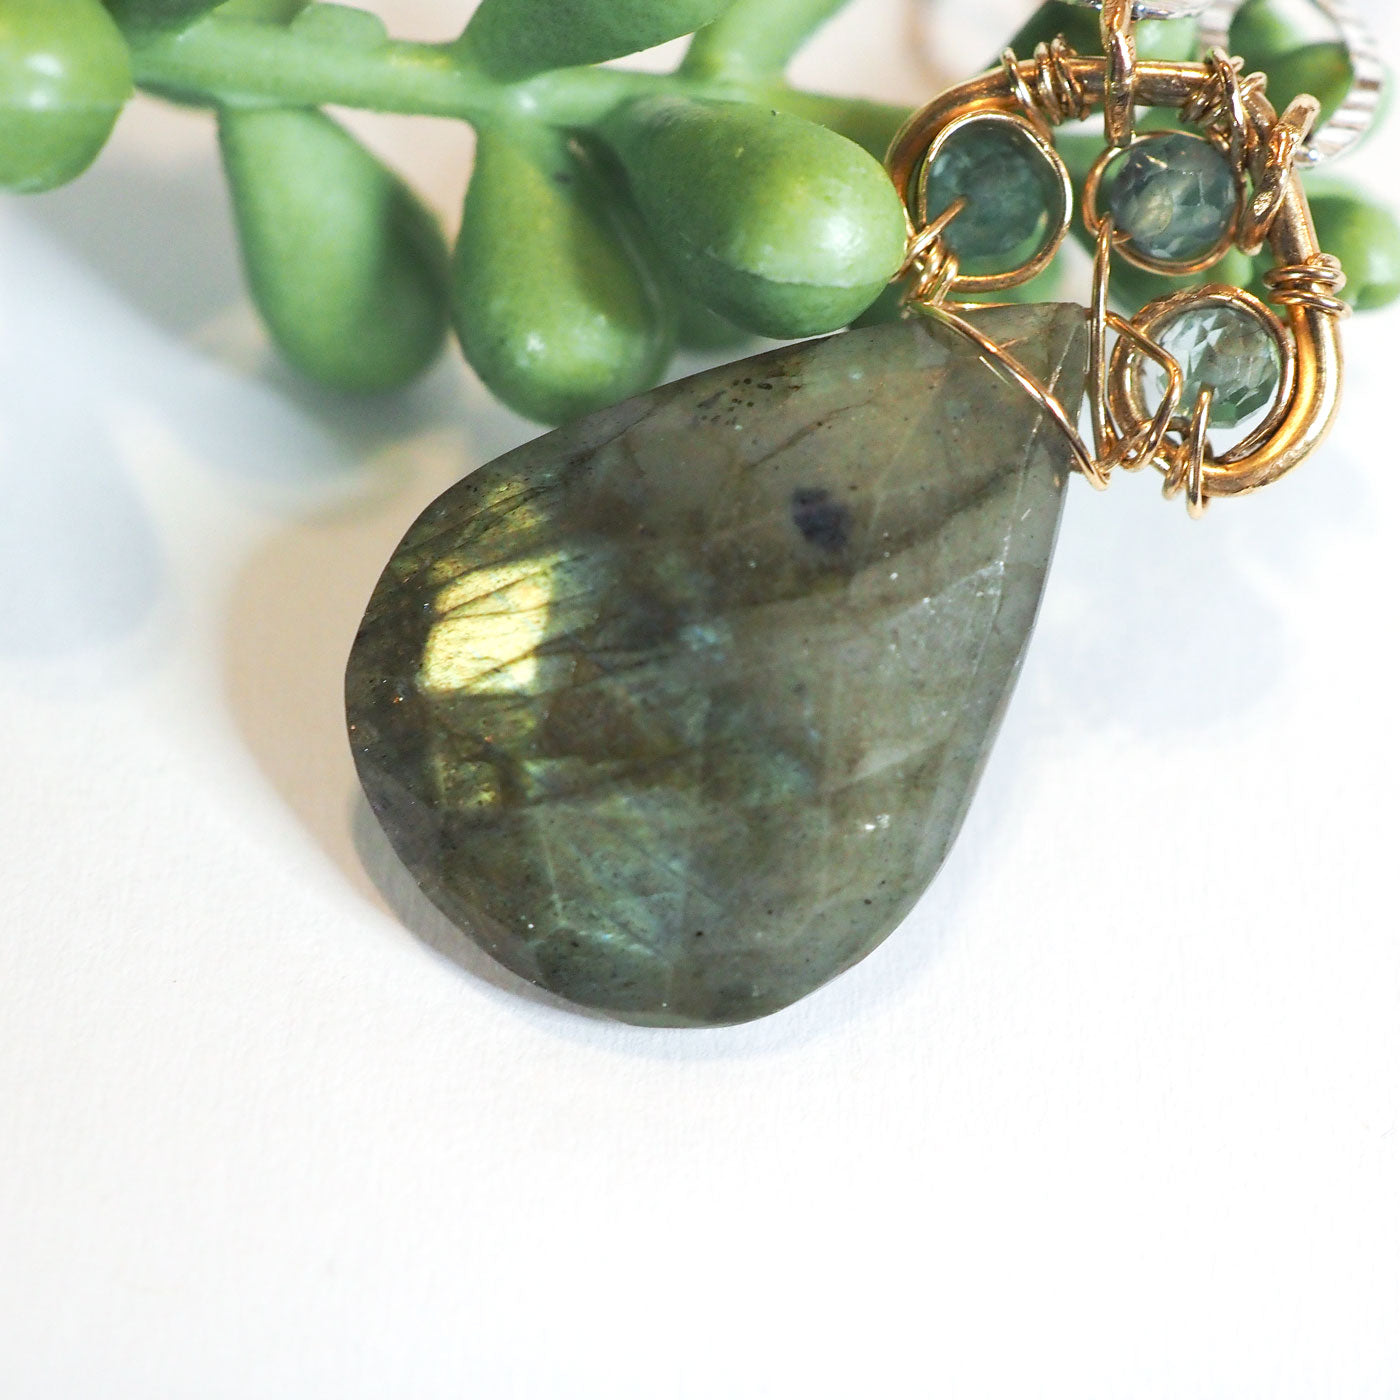 A close-up of the featured Labradorite Drop